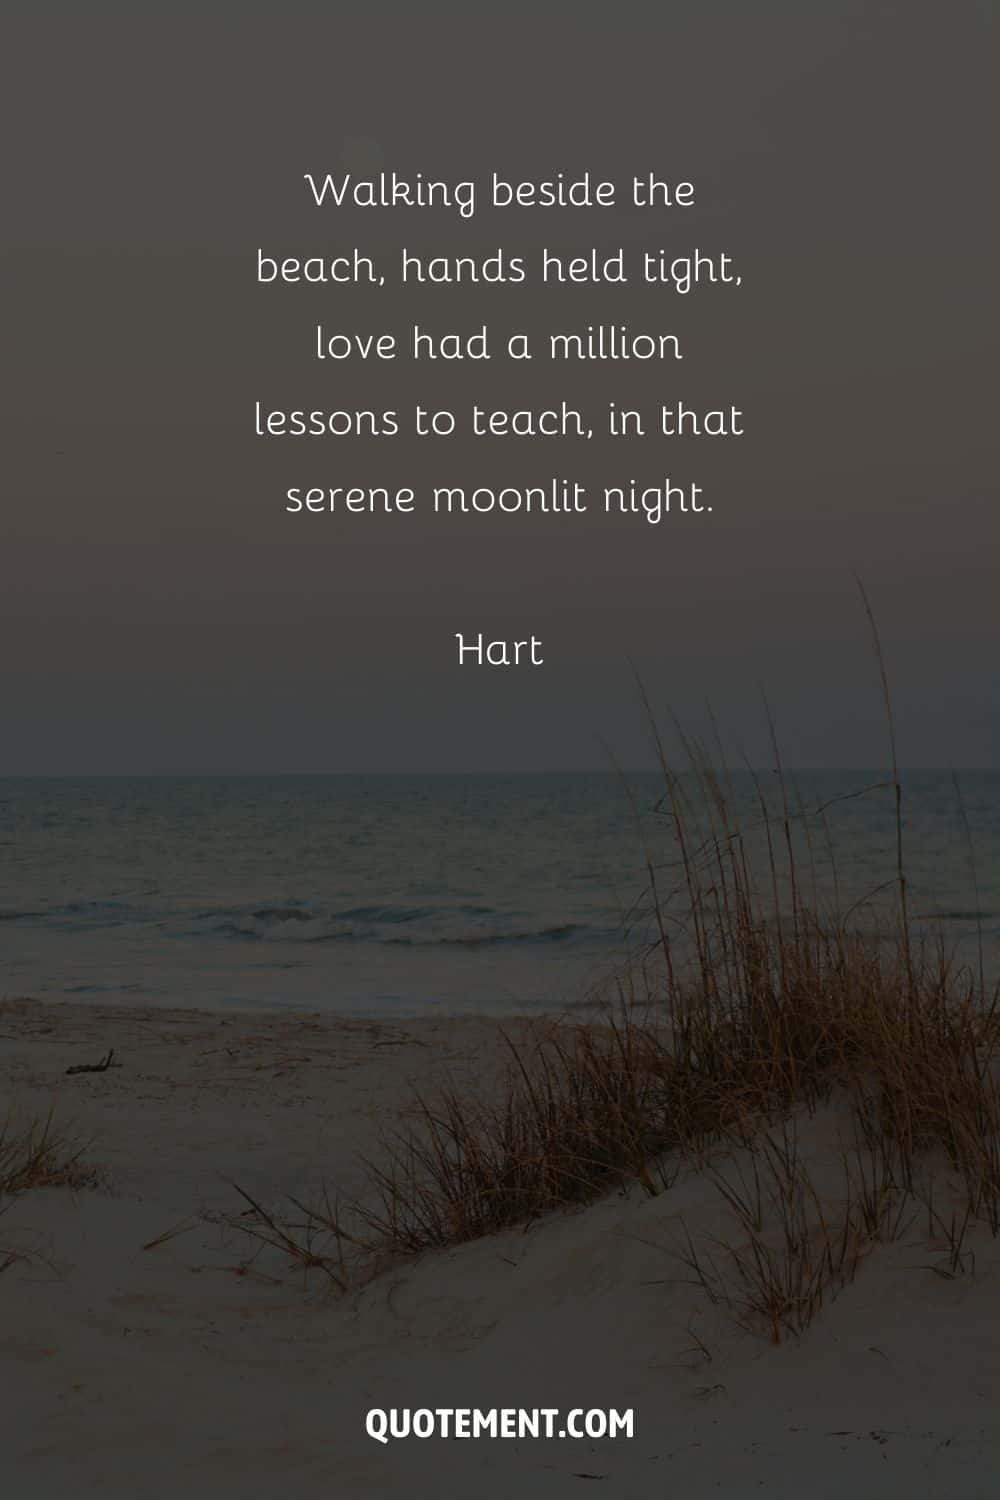 Walking beside the beach, hands held tight, love had a million lessons to teach, in that serene moonlit night. – Hart